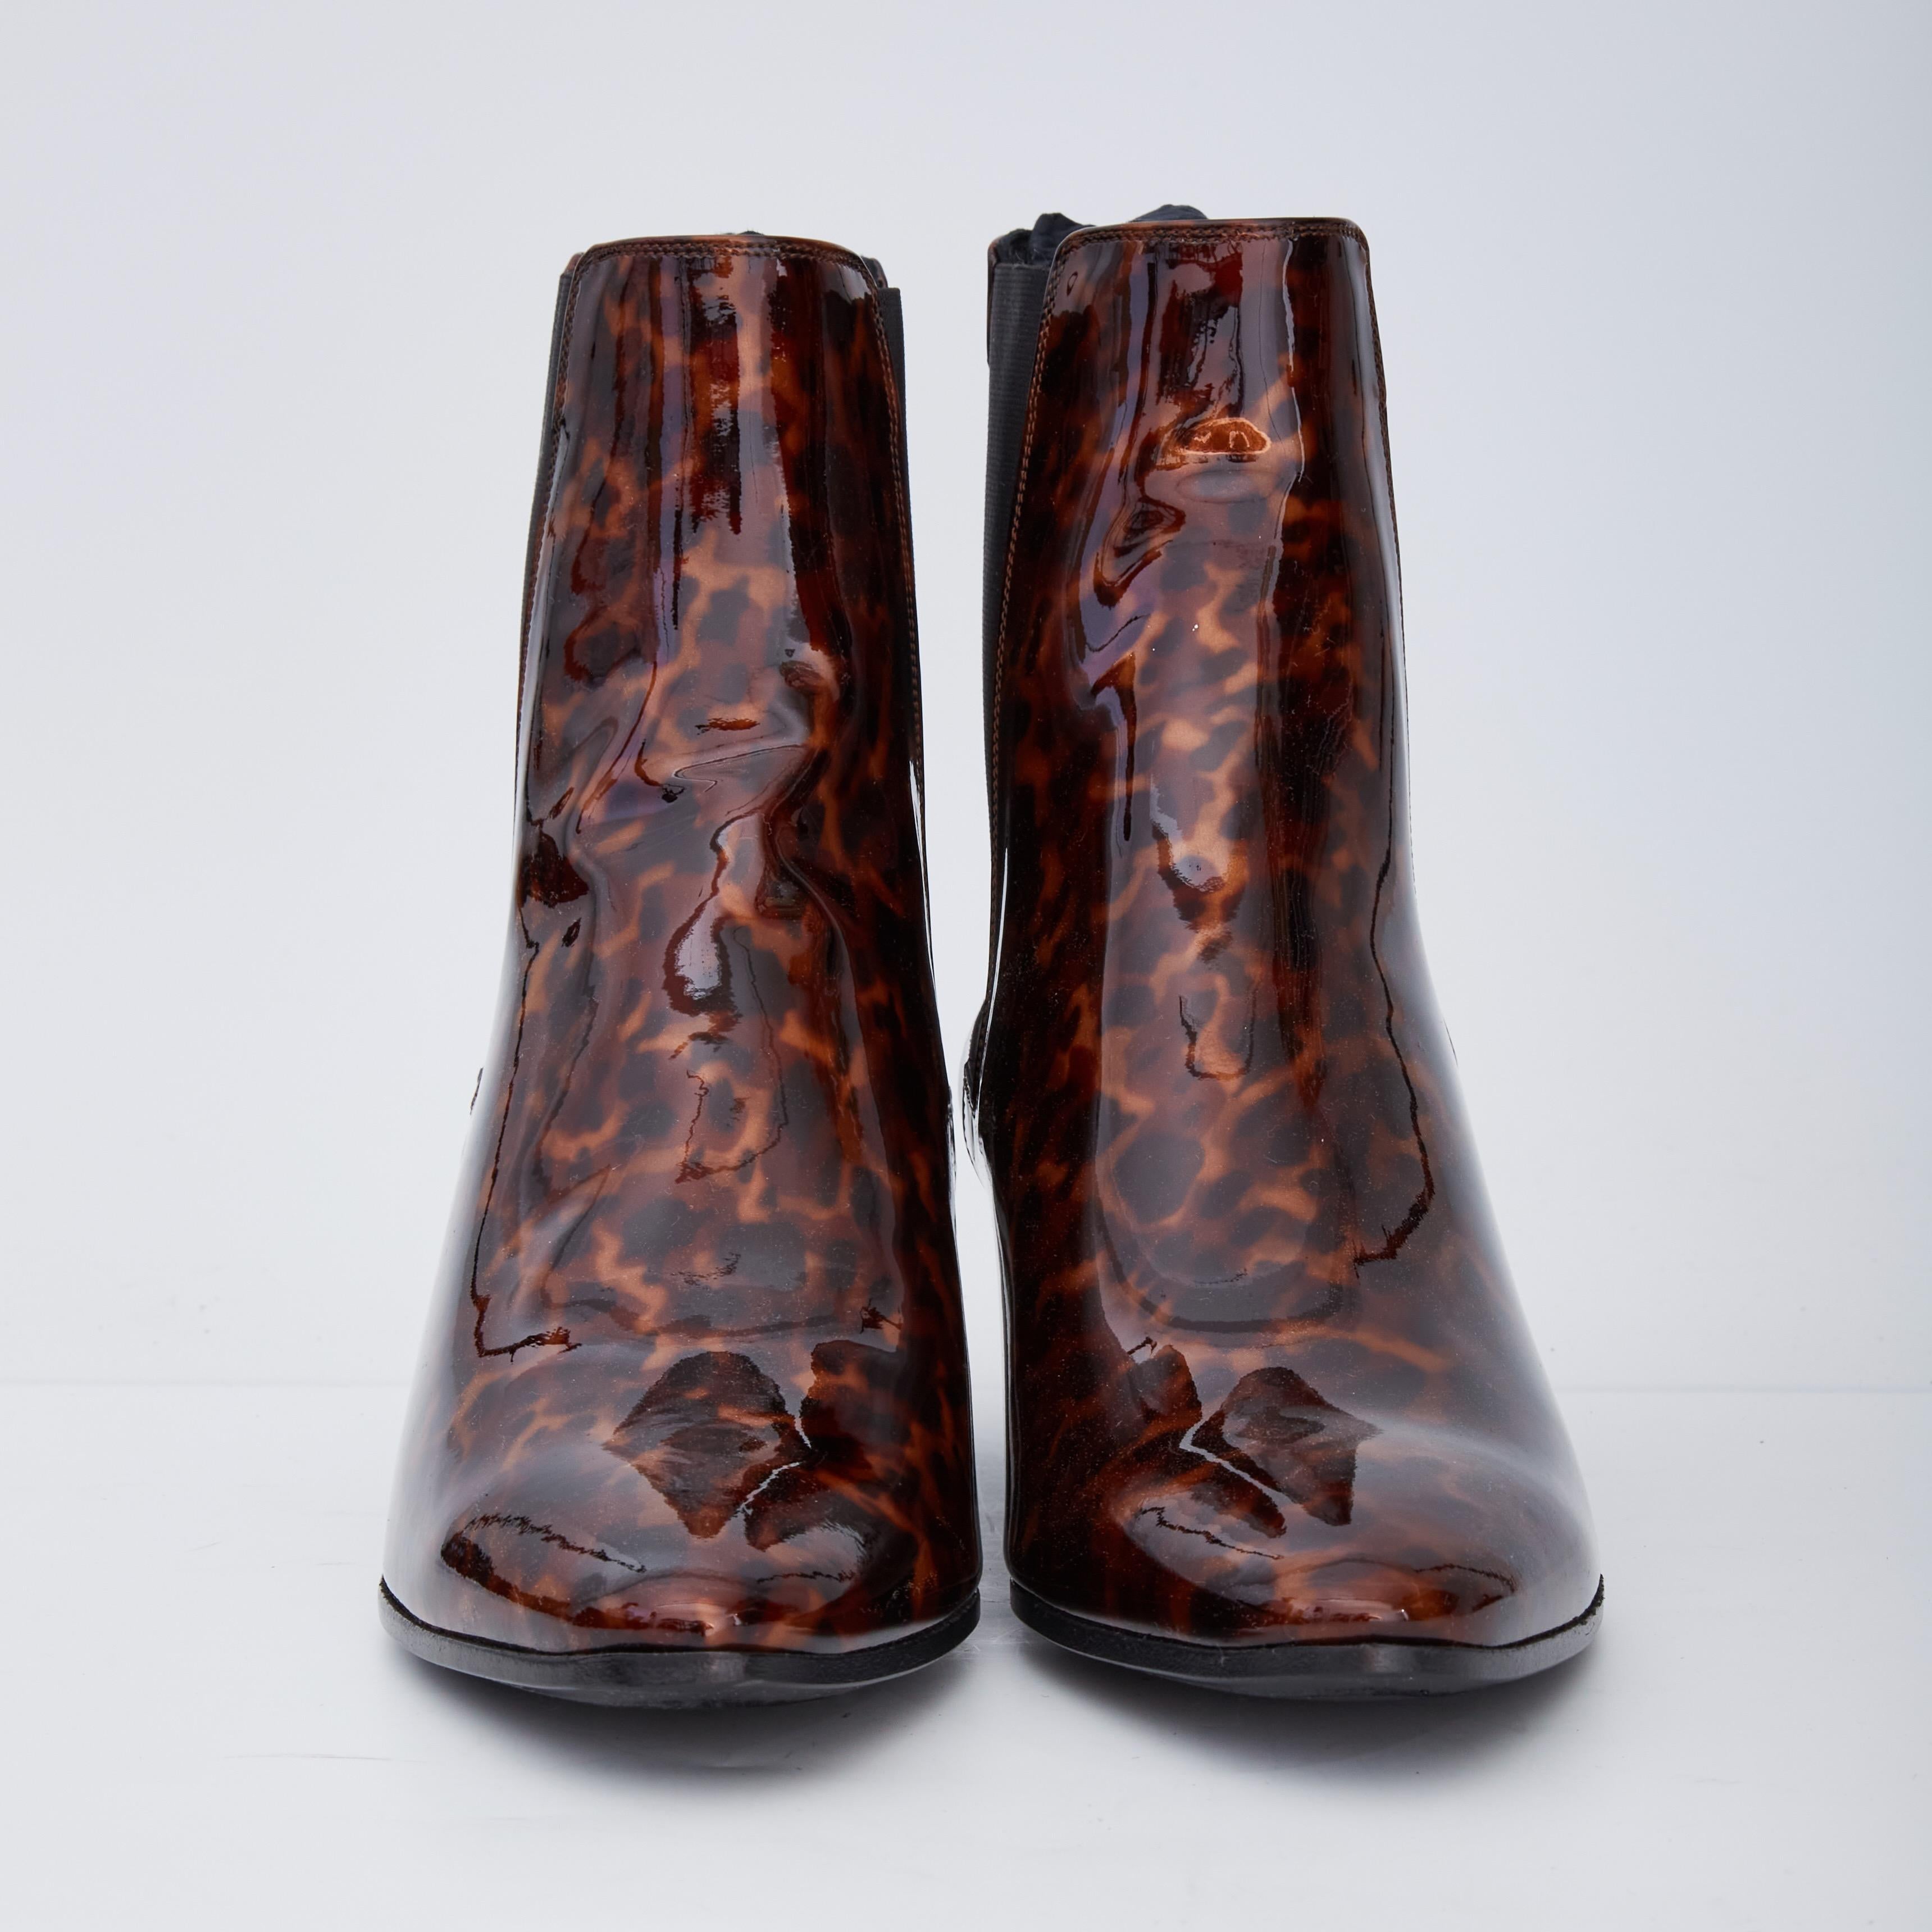 Saint Laurent Chelsea style boots for women made of patent leather with animal print. 

COLOR: Brown
MATERIAL: Patent leather
ITEM CODE: 606602
SIZE: 39 EU / 8 US
HEEL HEIGHT:  50 mm / 1”
CONDITION: New
COMES WITH: Dust bag and box 

Made in Italy